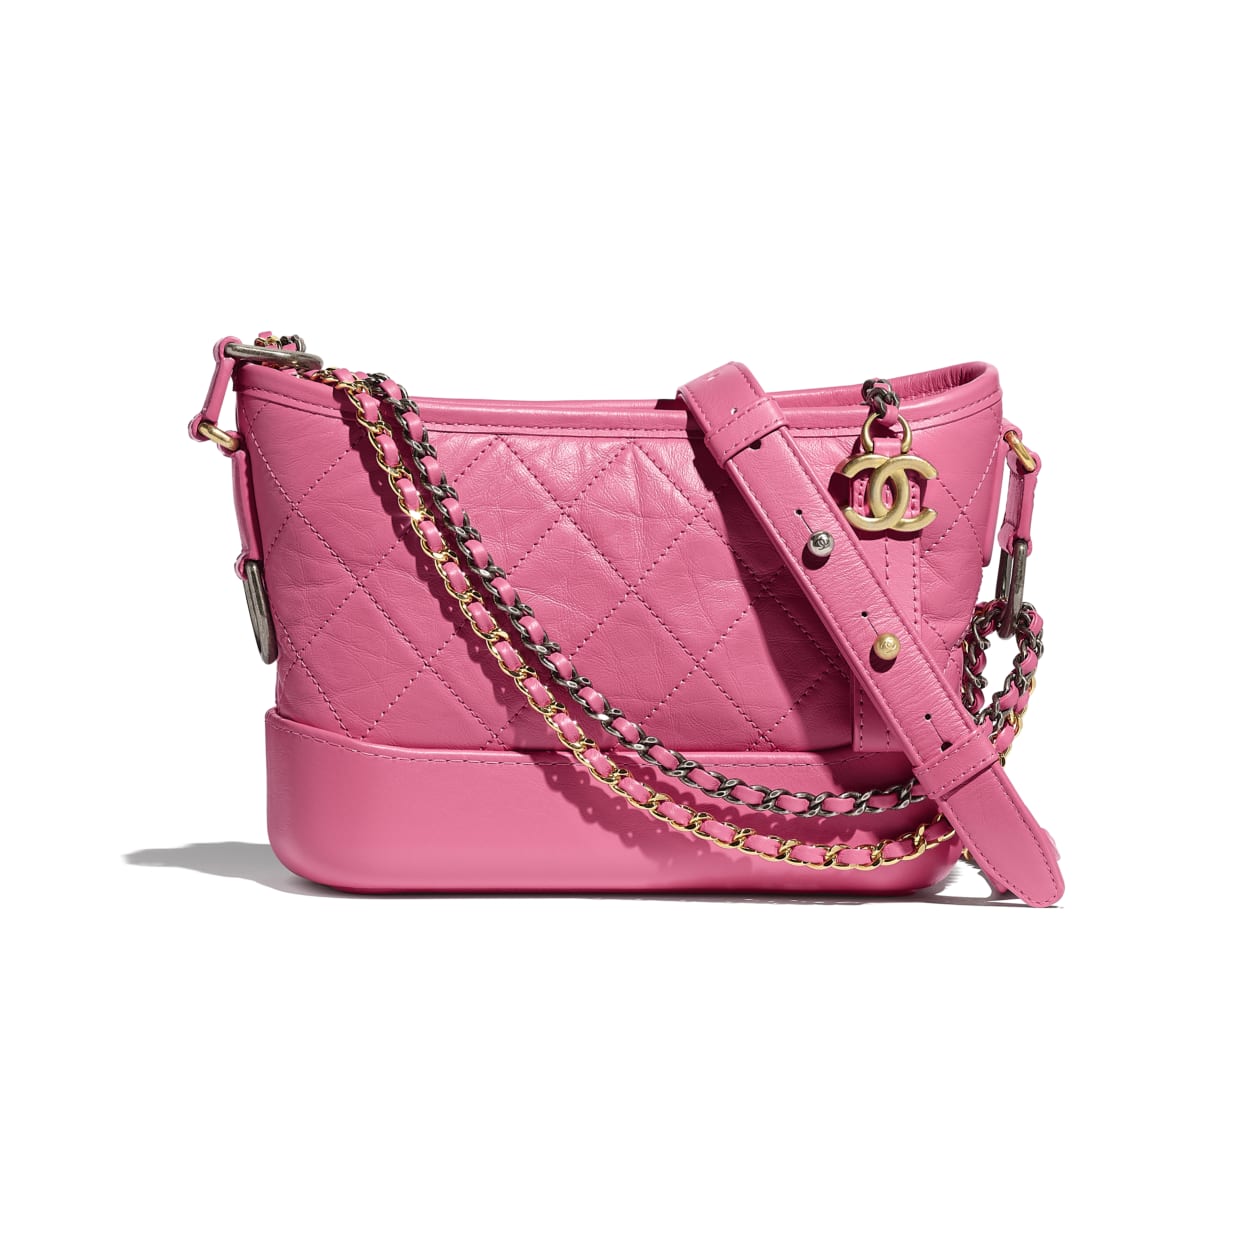 CHANEL, Bags, New Chanel Gabrielle Small Pink Hobo Bag